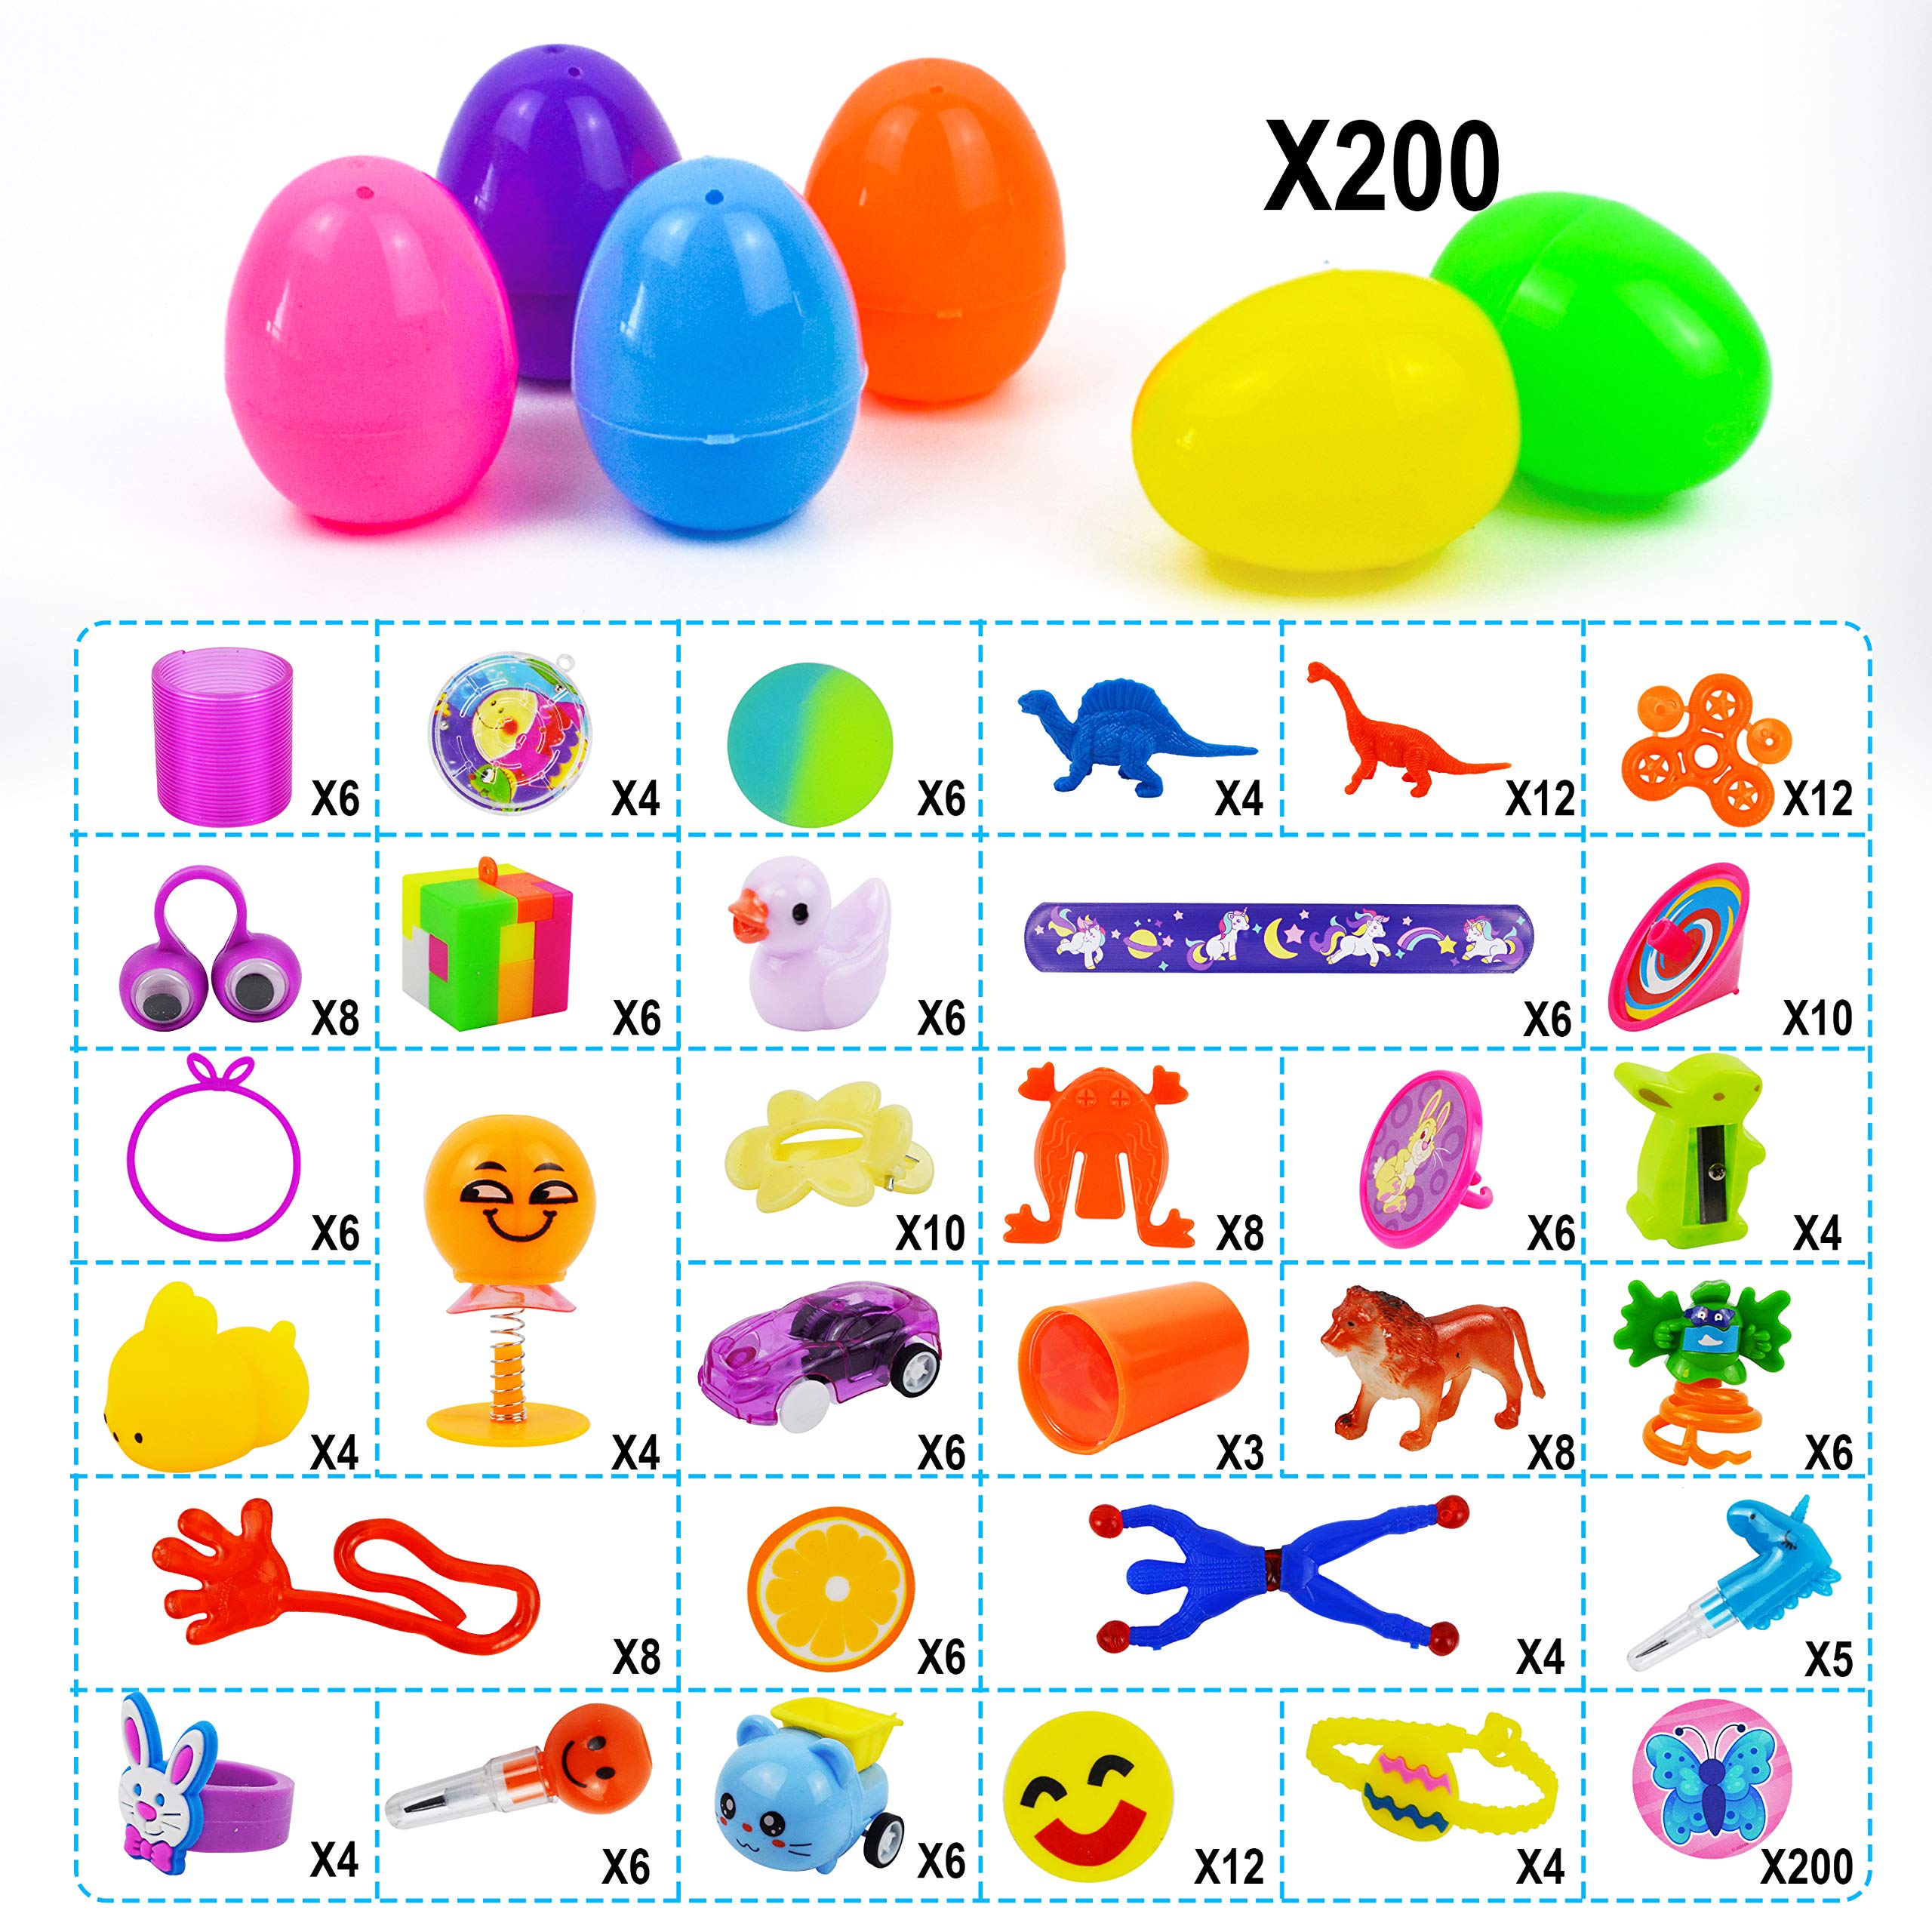 JOYIN 200 PCS Easter Prefilled Eggs with Assorted Toys for Easter Basket Stuffers, Easter Egg Hunt Supplies, Easter Classroom Prizes, Easter Party Favor